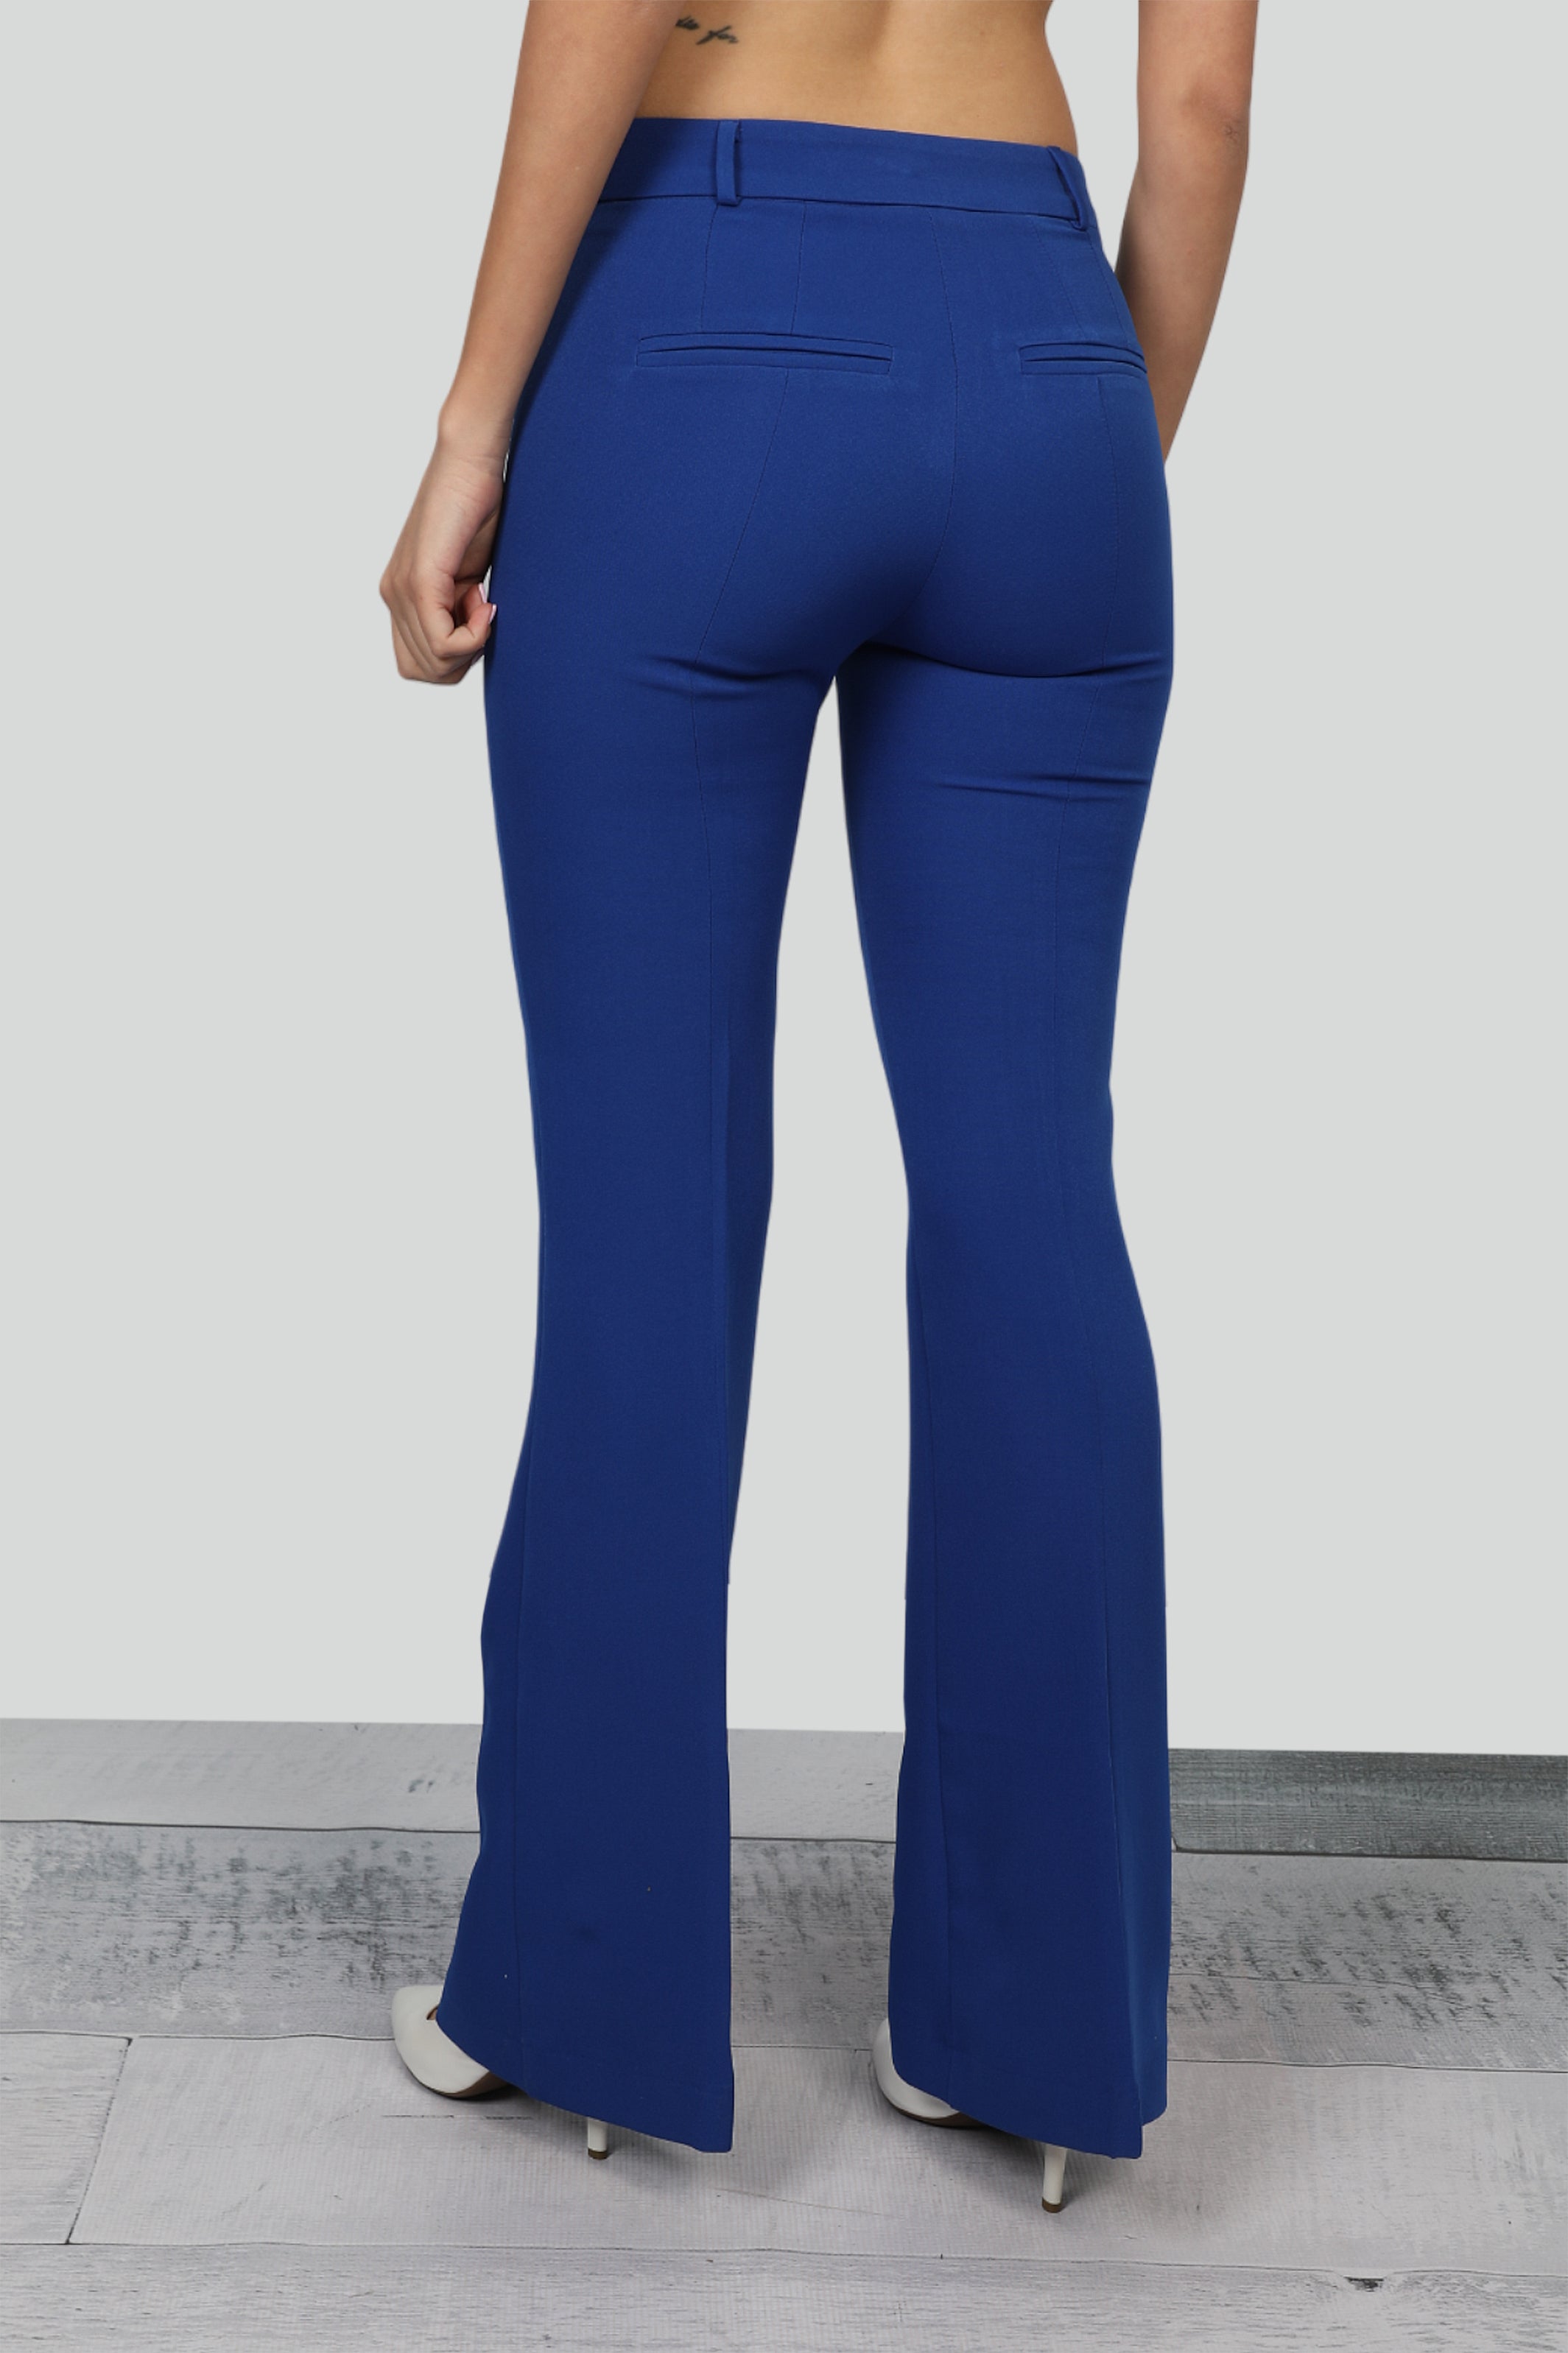 Classy Flare Blue Pants With Zipper To Close